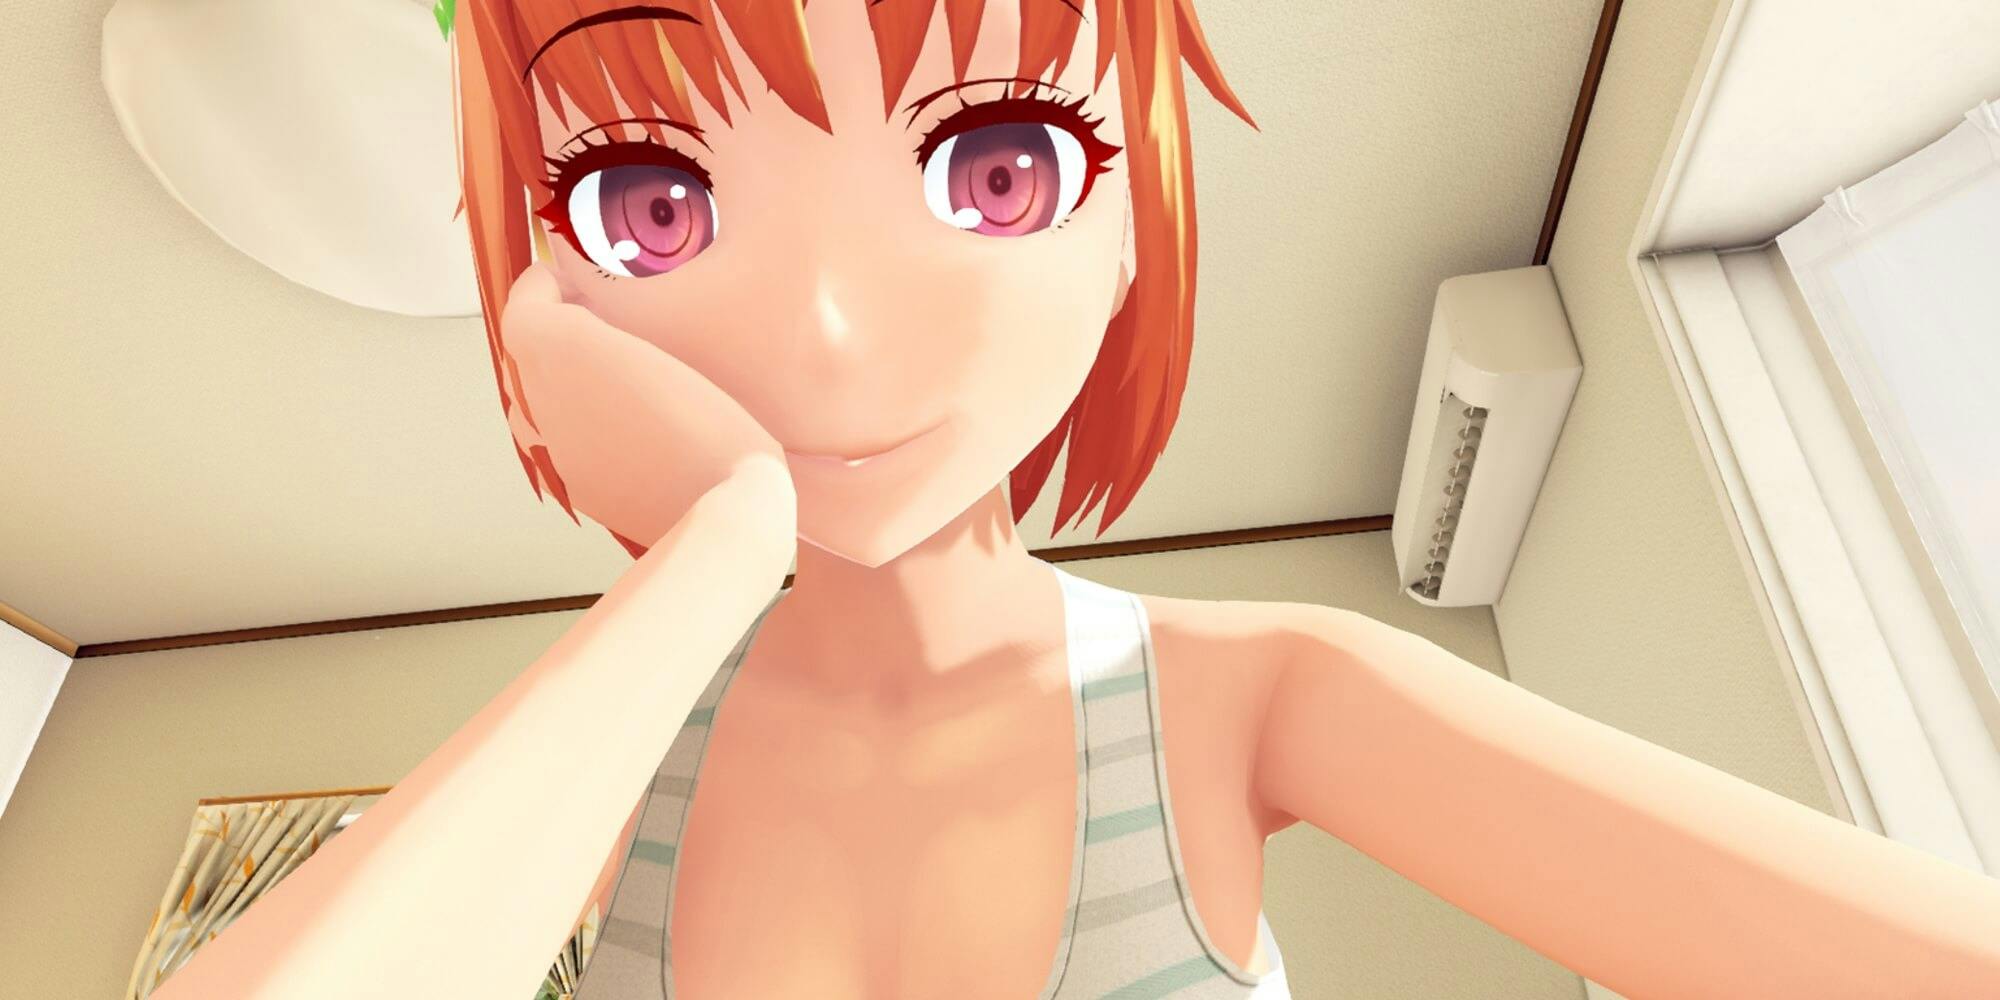 Interactive Anime Porn - Oculus Quest Porn: Best VR Porn Games for Virtual Desktop and More